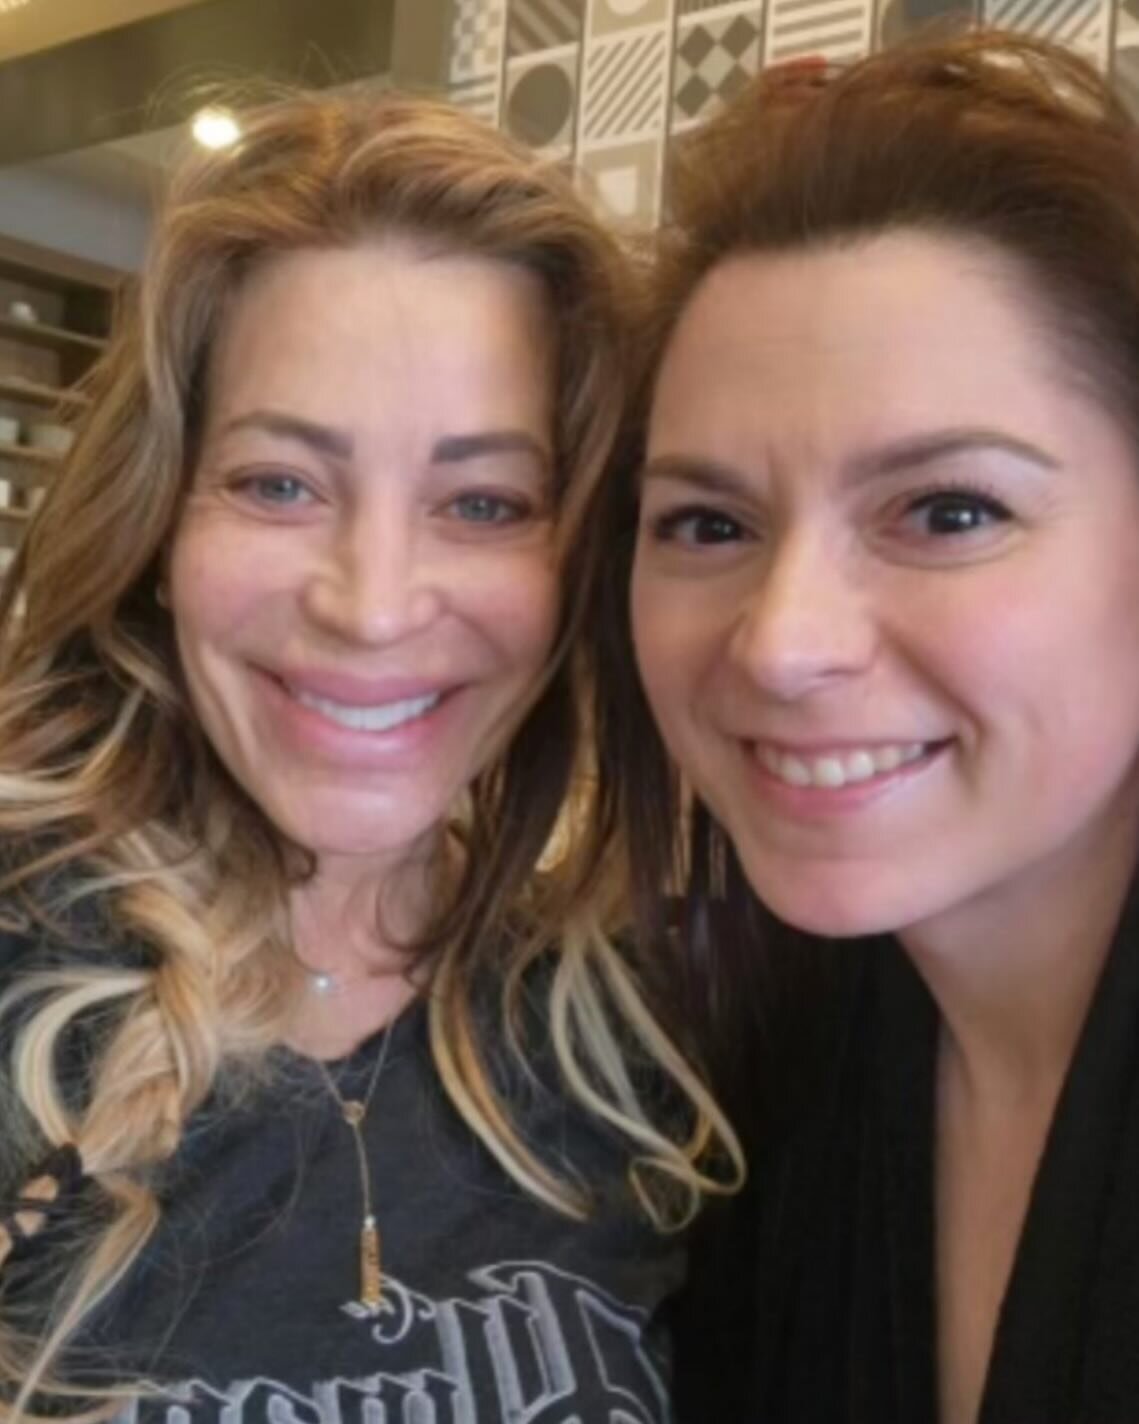 🎤 &ldquo;You never know who you&rsquo;ll run into at the @hyattplaceeastend! 
We were thrilled to host @therealtaylordayne while she was performing at @thesuffolkriverhead over the weekend.&rdquo;

🎭 The Hyatt Place East End is within walking dista